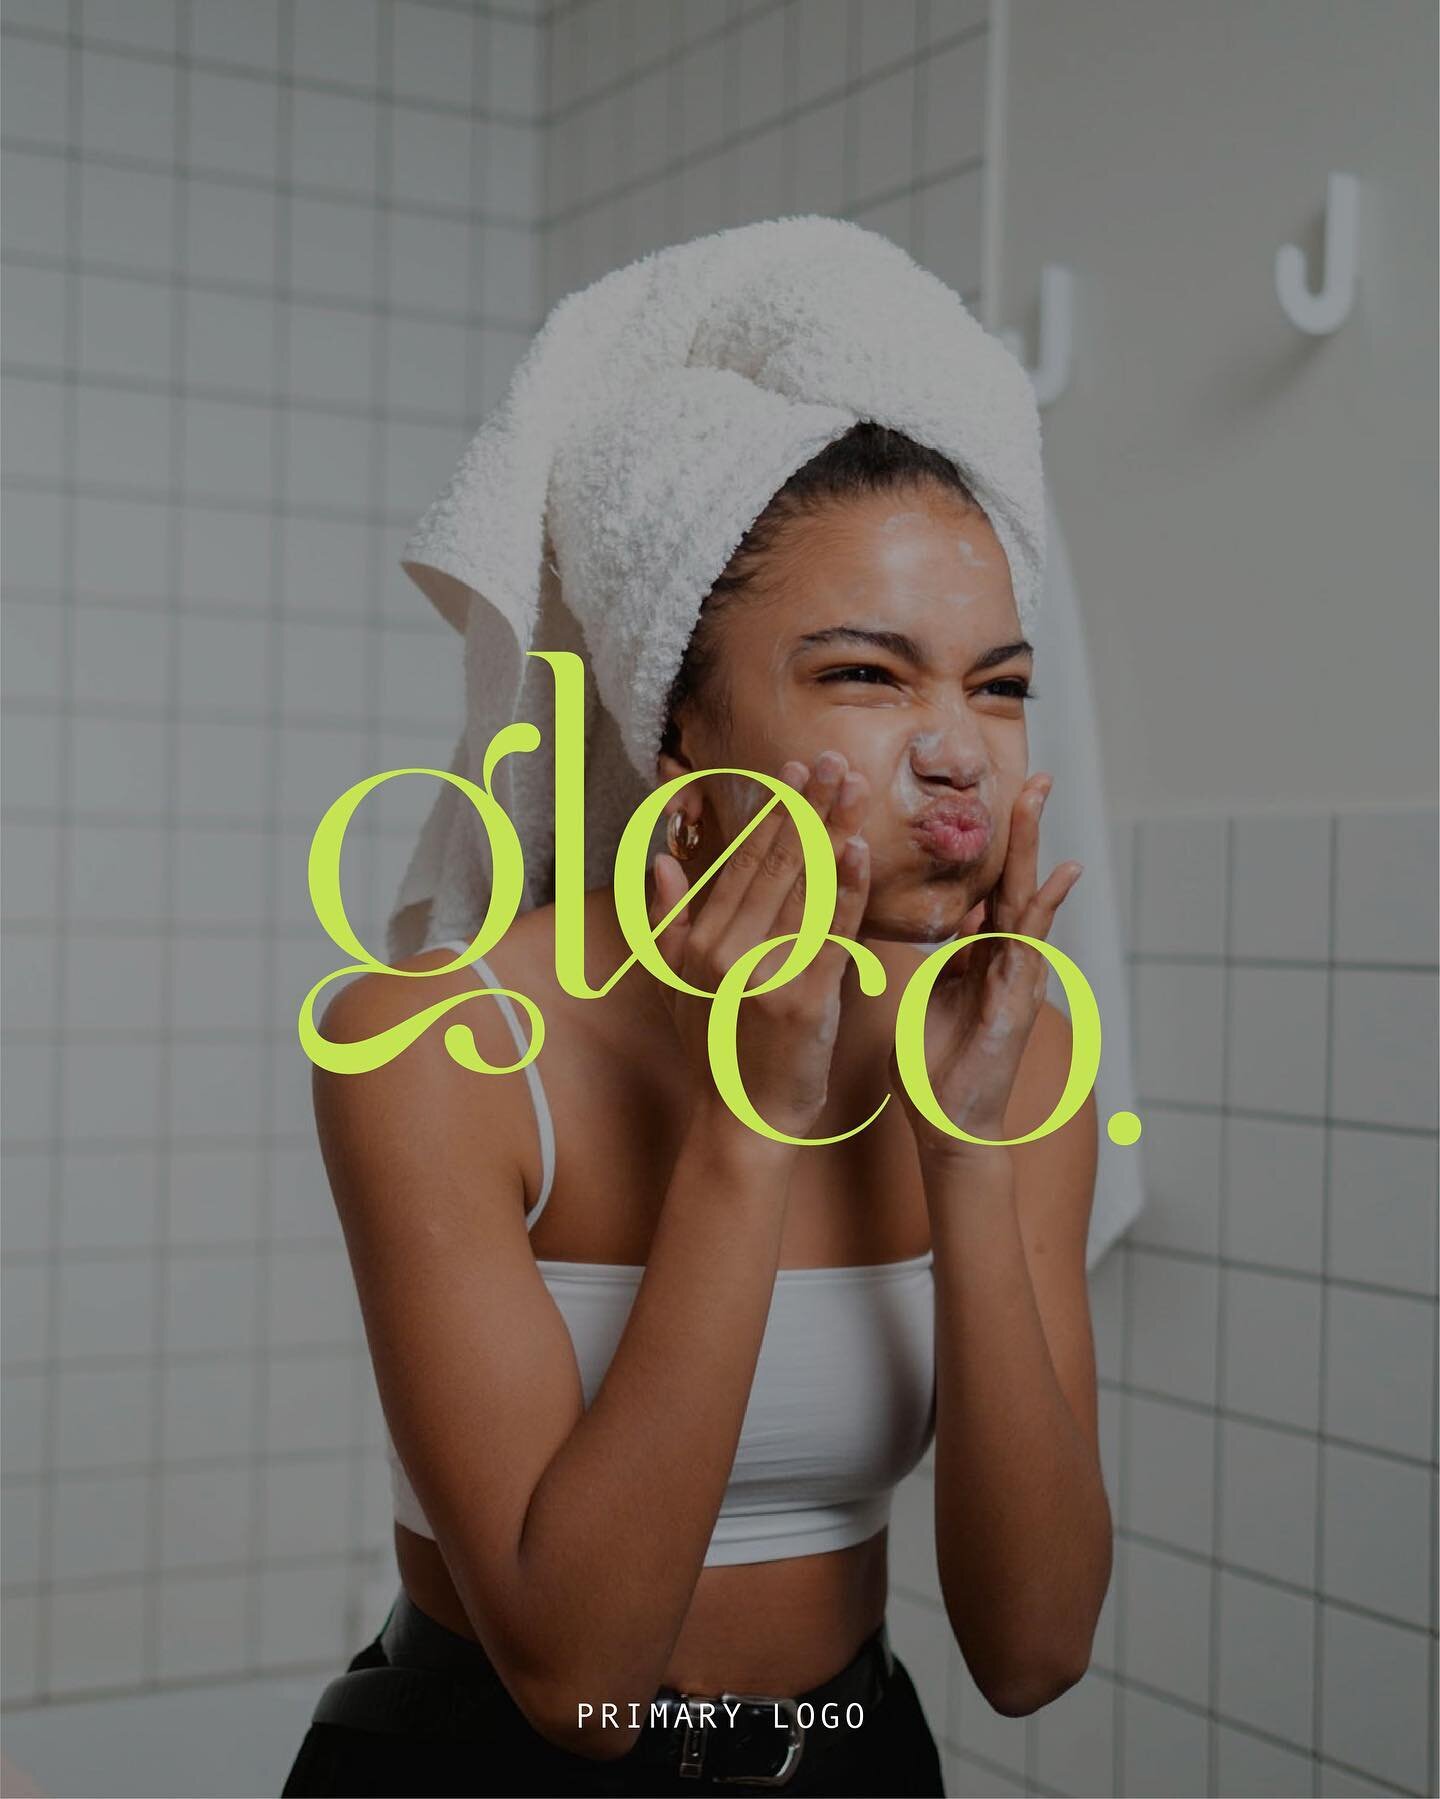 Presenting Glo Co, a clean and organic skin care brand that aims to make you feel good from within.

A quick glimpse of brand identity, packaging and social media for Glo Co

Worked on a passion project after months and this brief by @thebriefbank wa